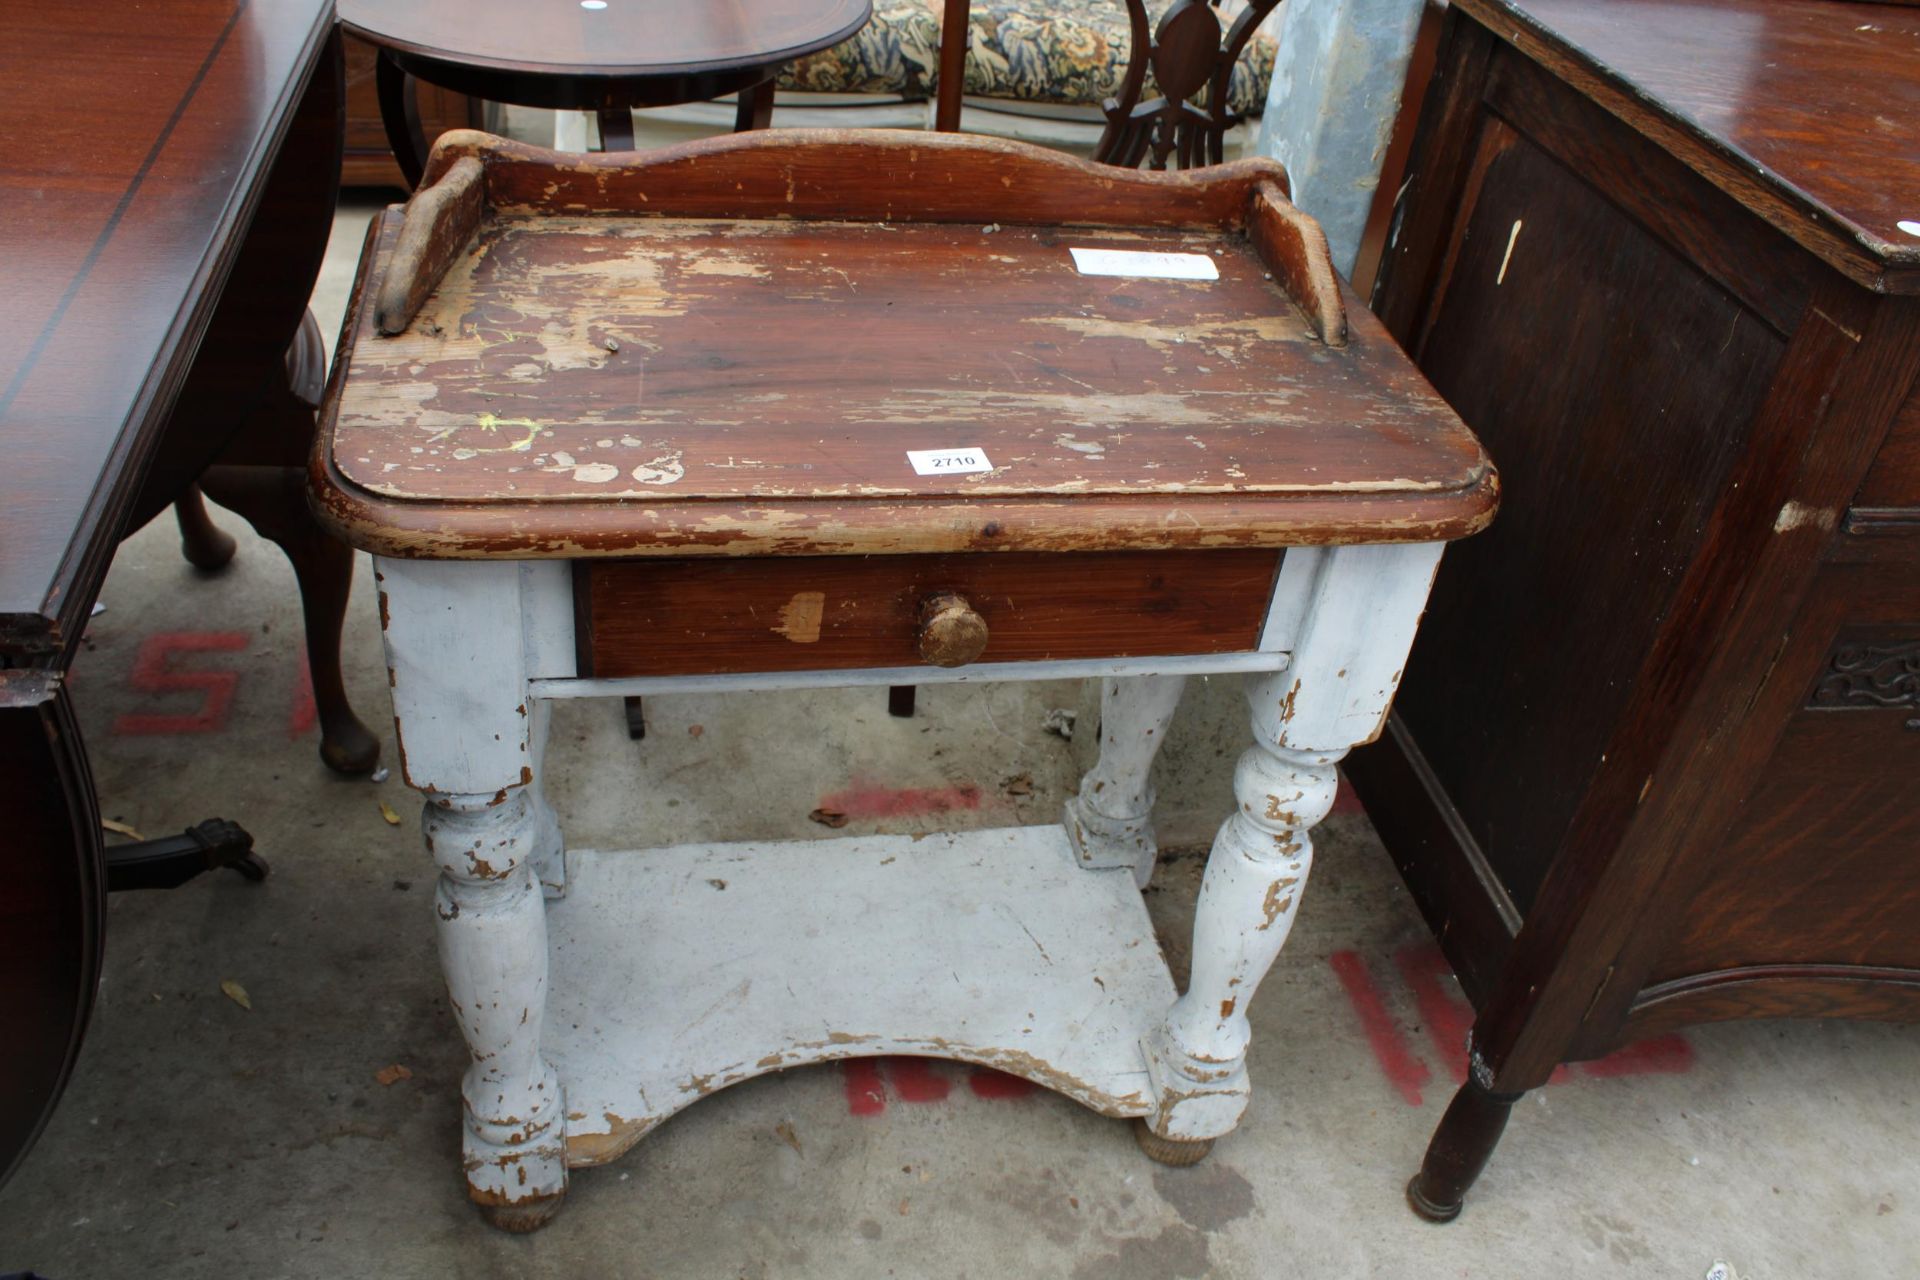 A MODERN PINE MINIATURE WASHSTAND WITH RAISED BACK ON TURNED LEGS 24" WIDE